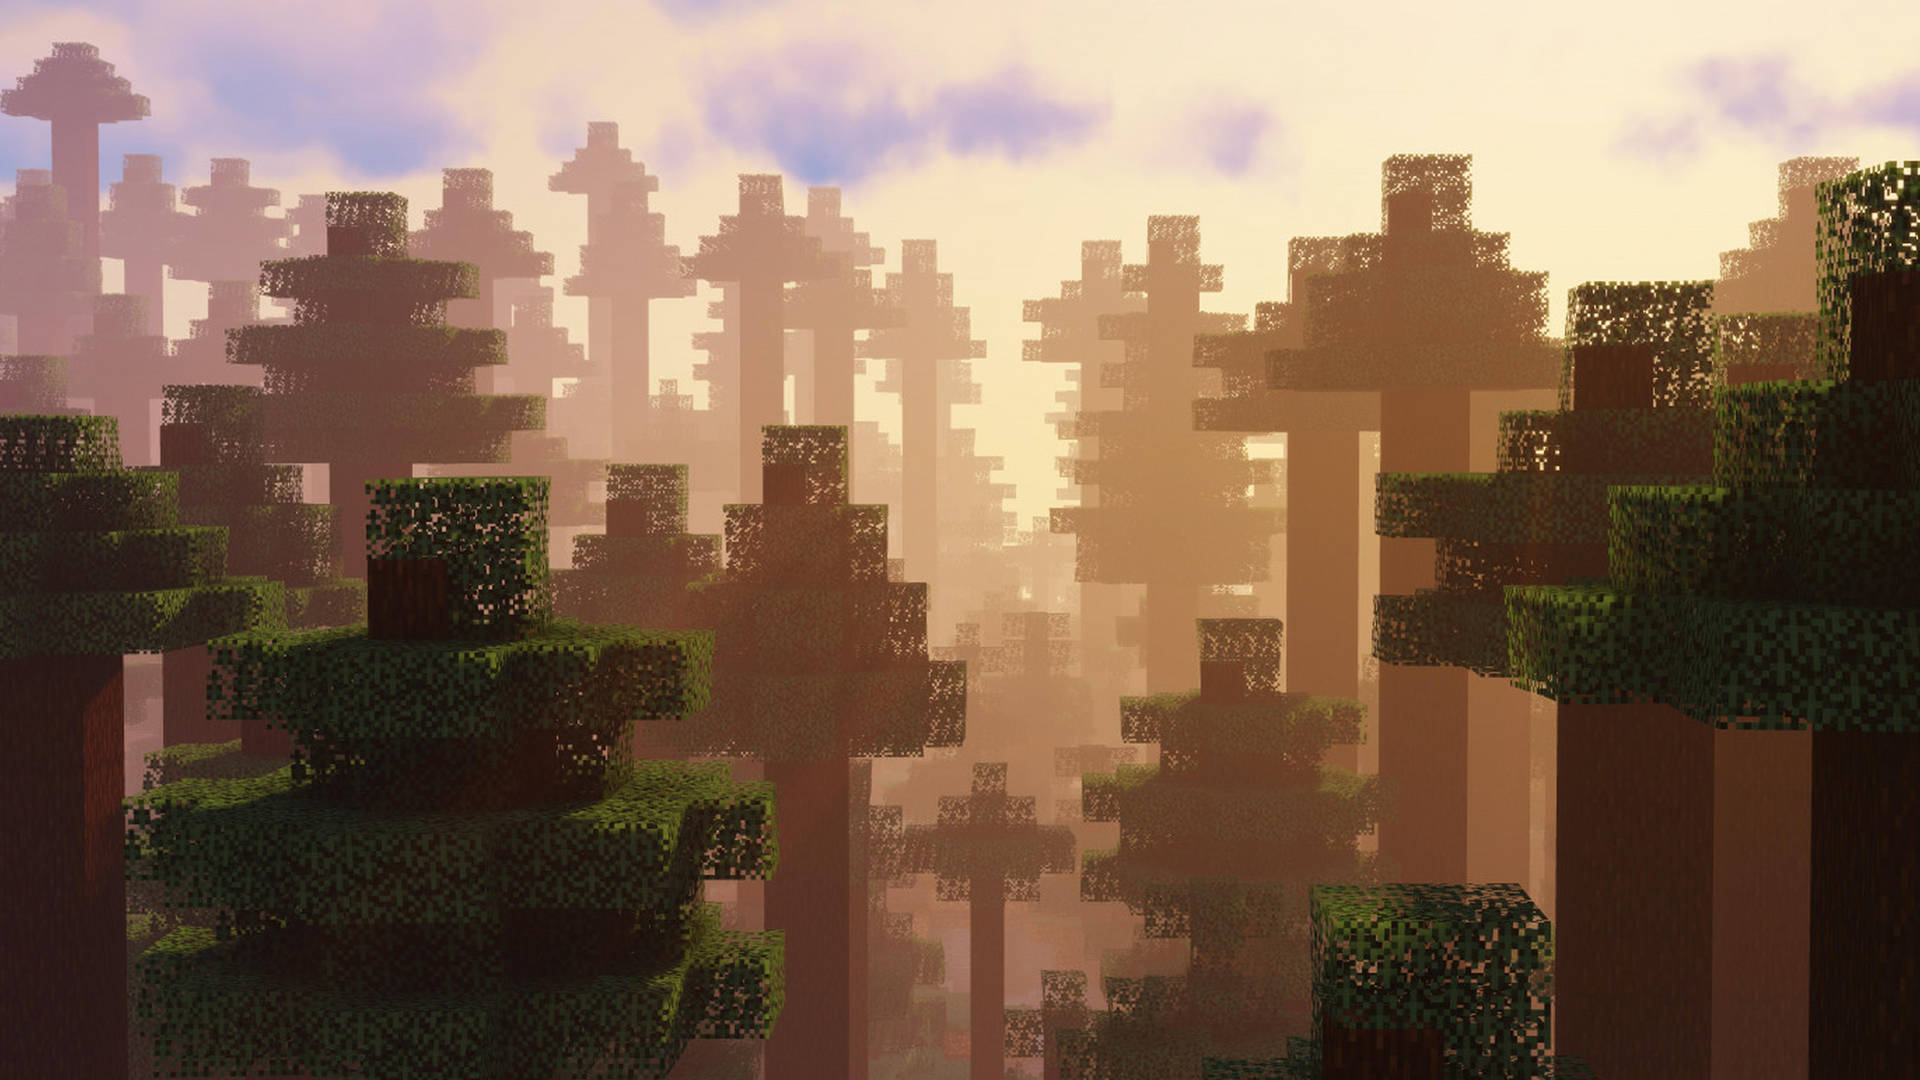 Forest Of Giant Trees 2560x1440 Minecraft Wallpaper